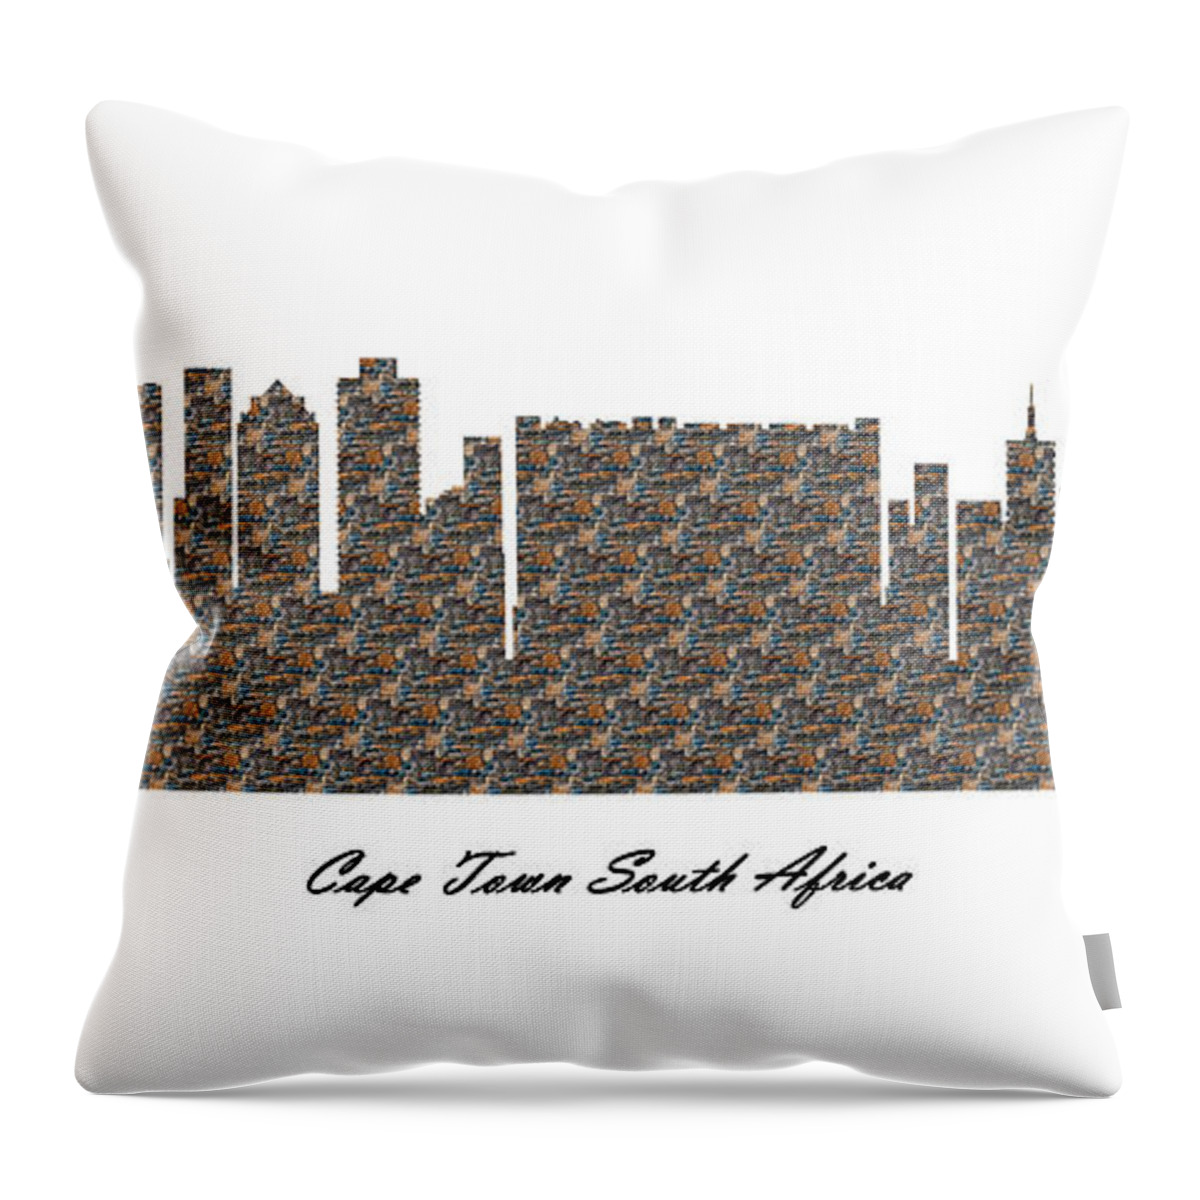 Fine Art Throw Pillow featuring the digital art Cape Town South Africa 3D Stone Wall Skyline by Gregory Murray